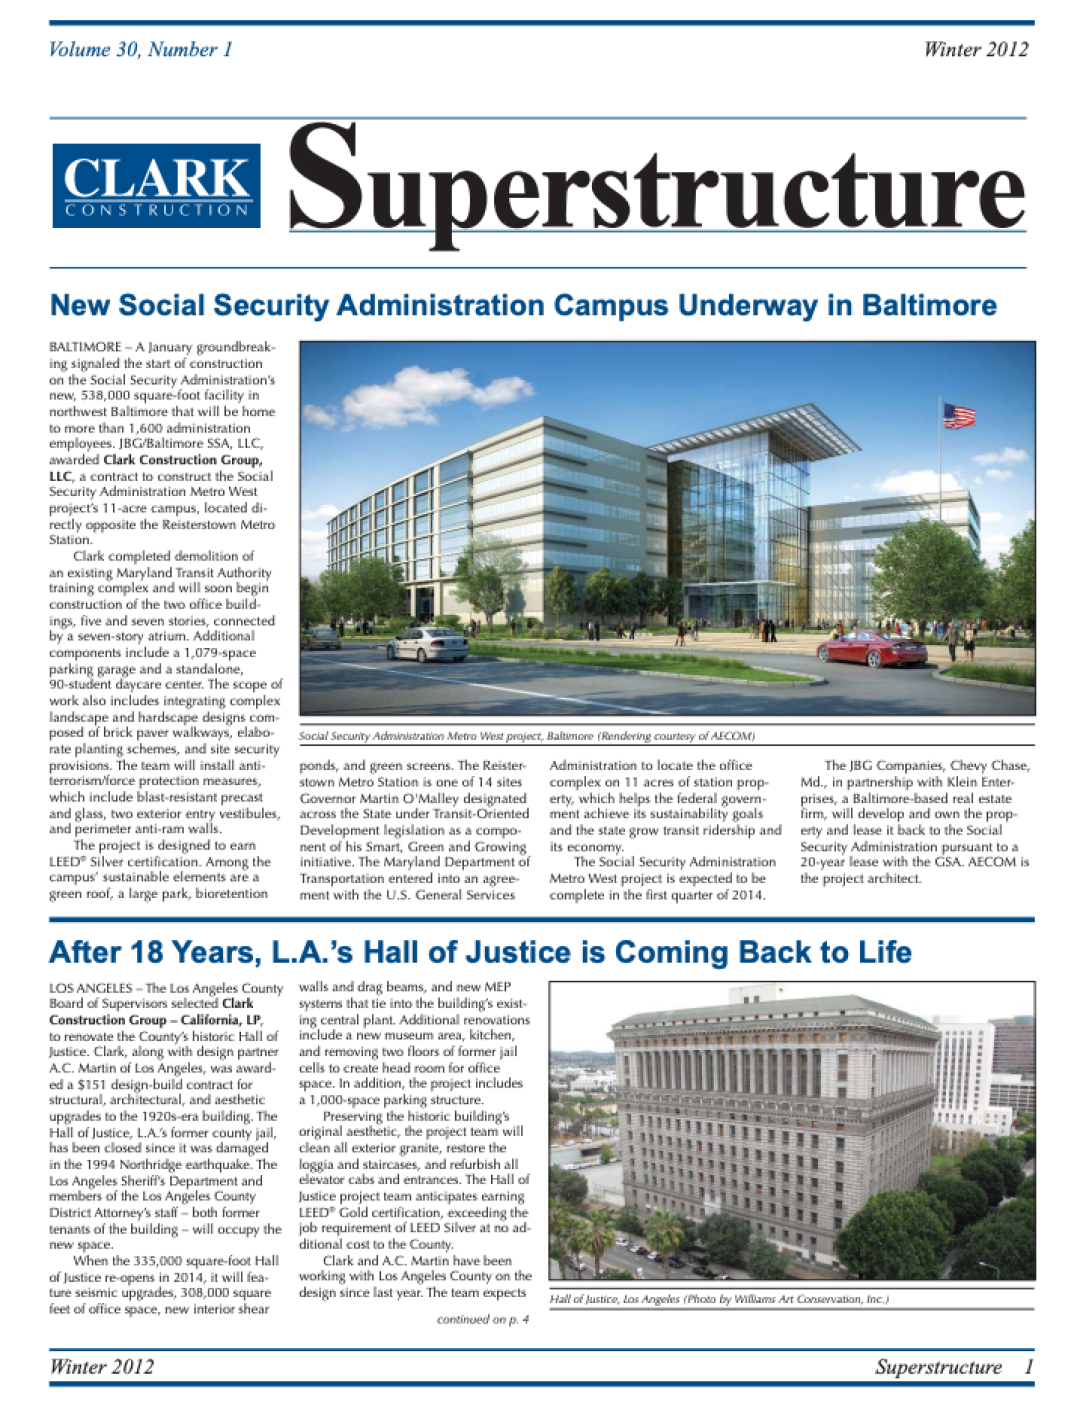 Superstructure Winter 2012